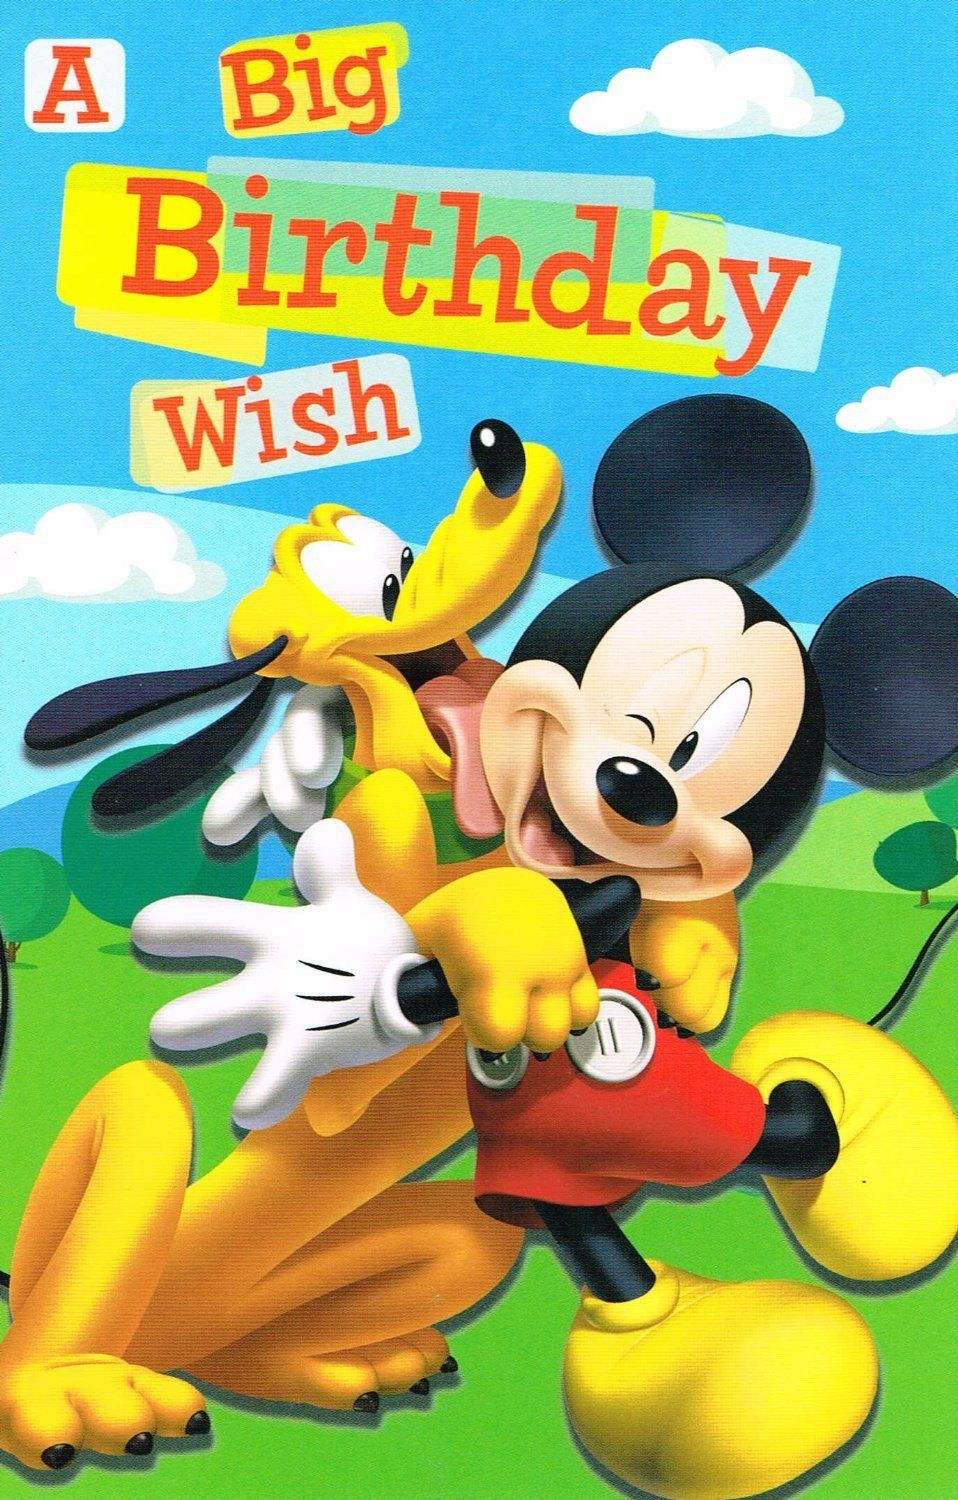 Mickey Mouse Birthday Wishes
 MICKEY MOUSE PLUTO A BIG BIRTHDAY WISH BIRTHDAY CARD NEW